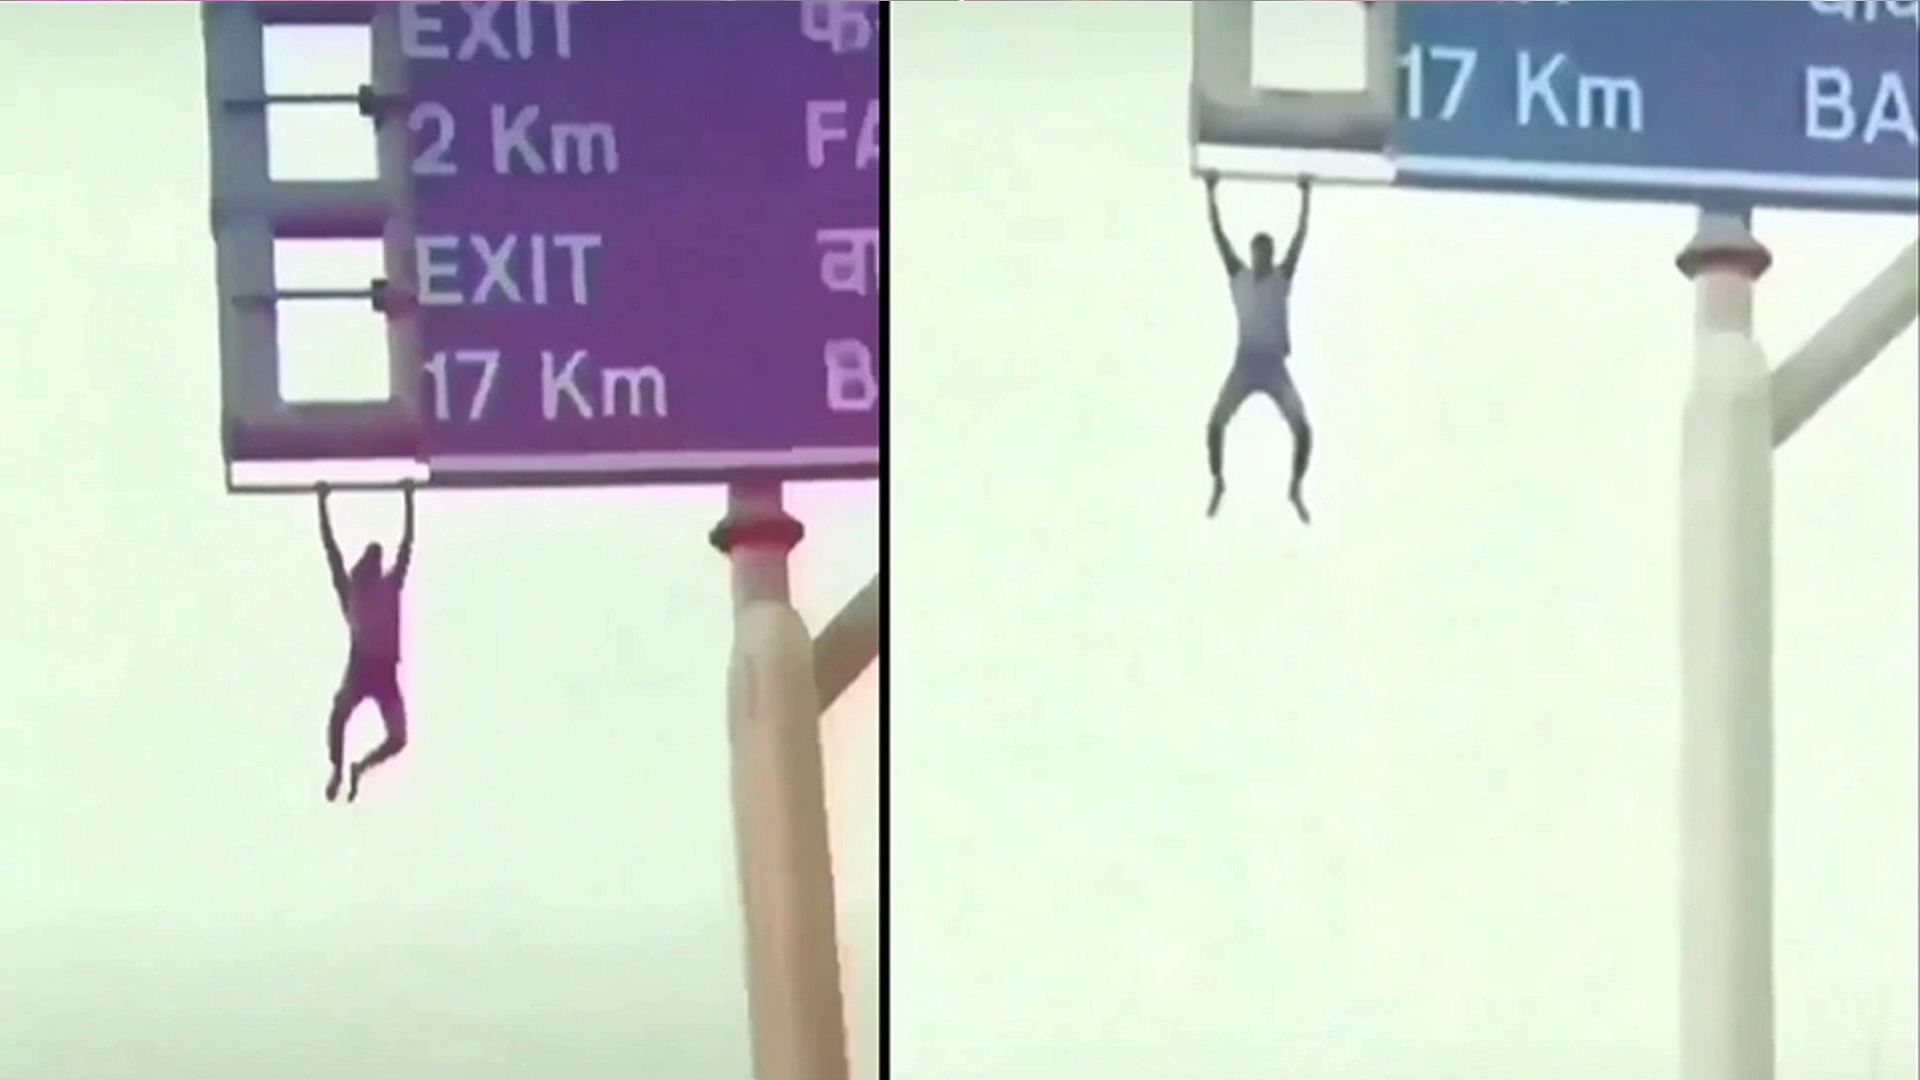 Man Exercise Video is going viral Hanging in the air the person did exercise